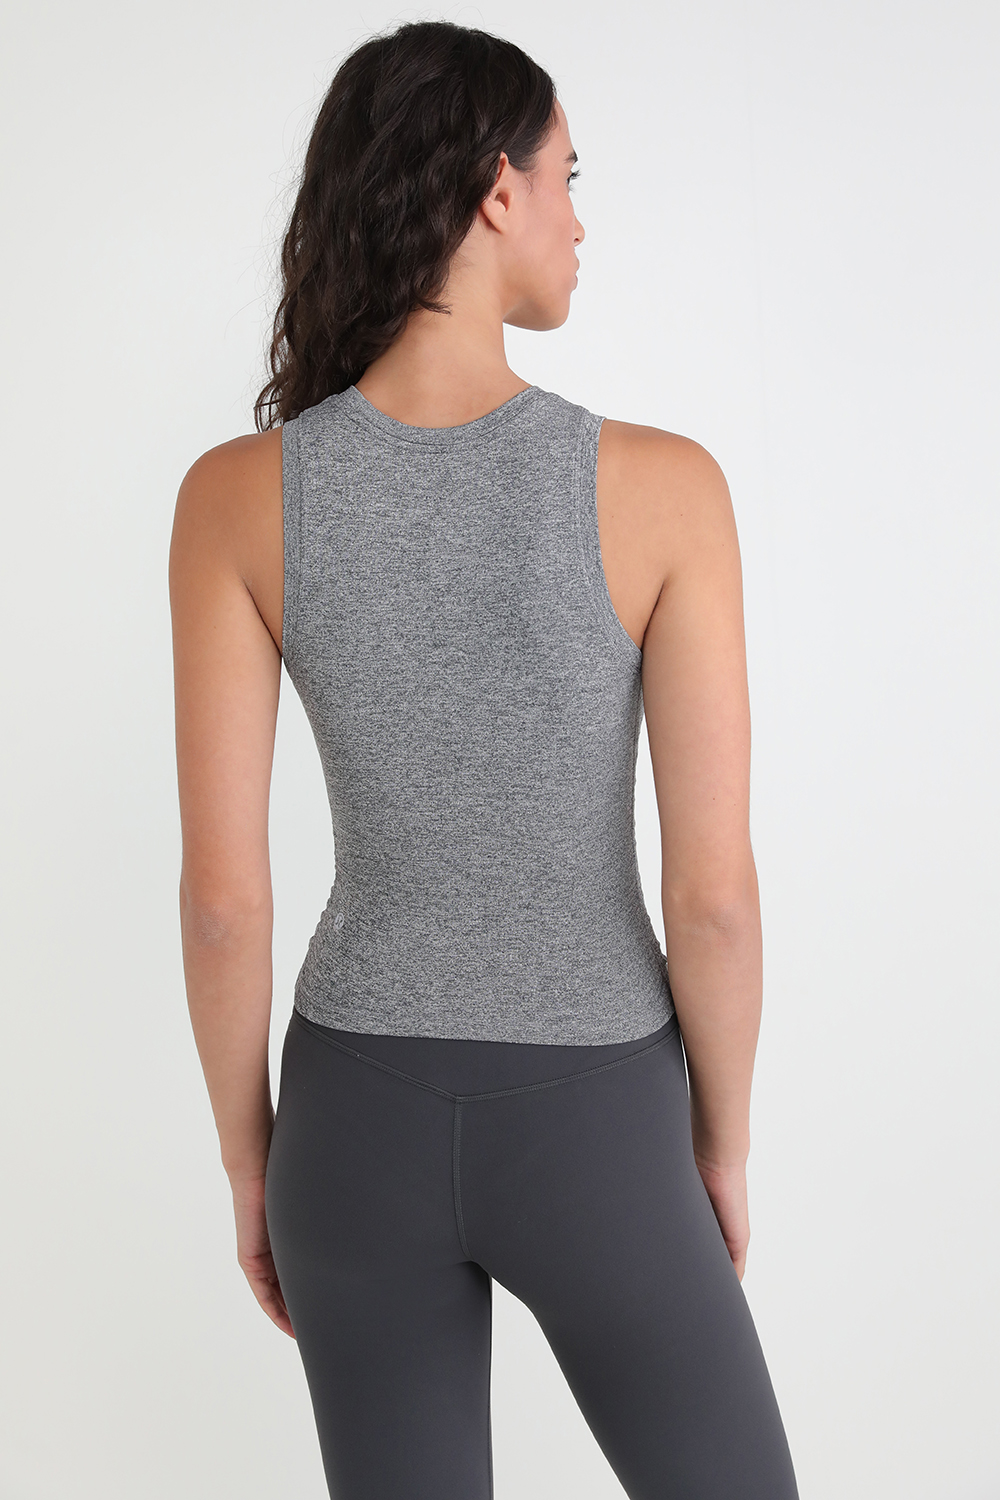 License to Train Tight-Fit Tank Top LULULEMON